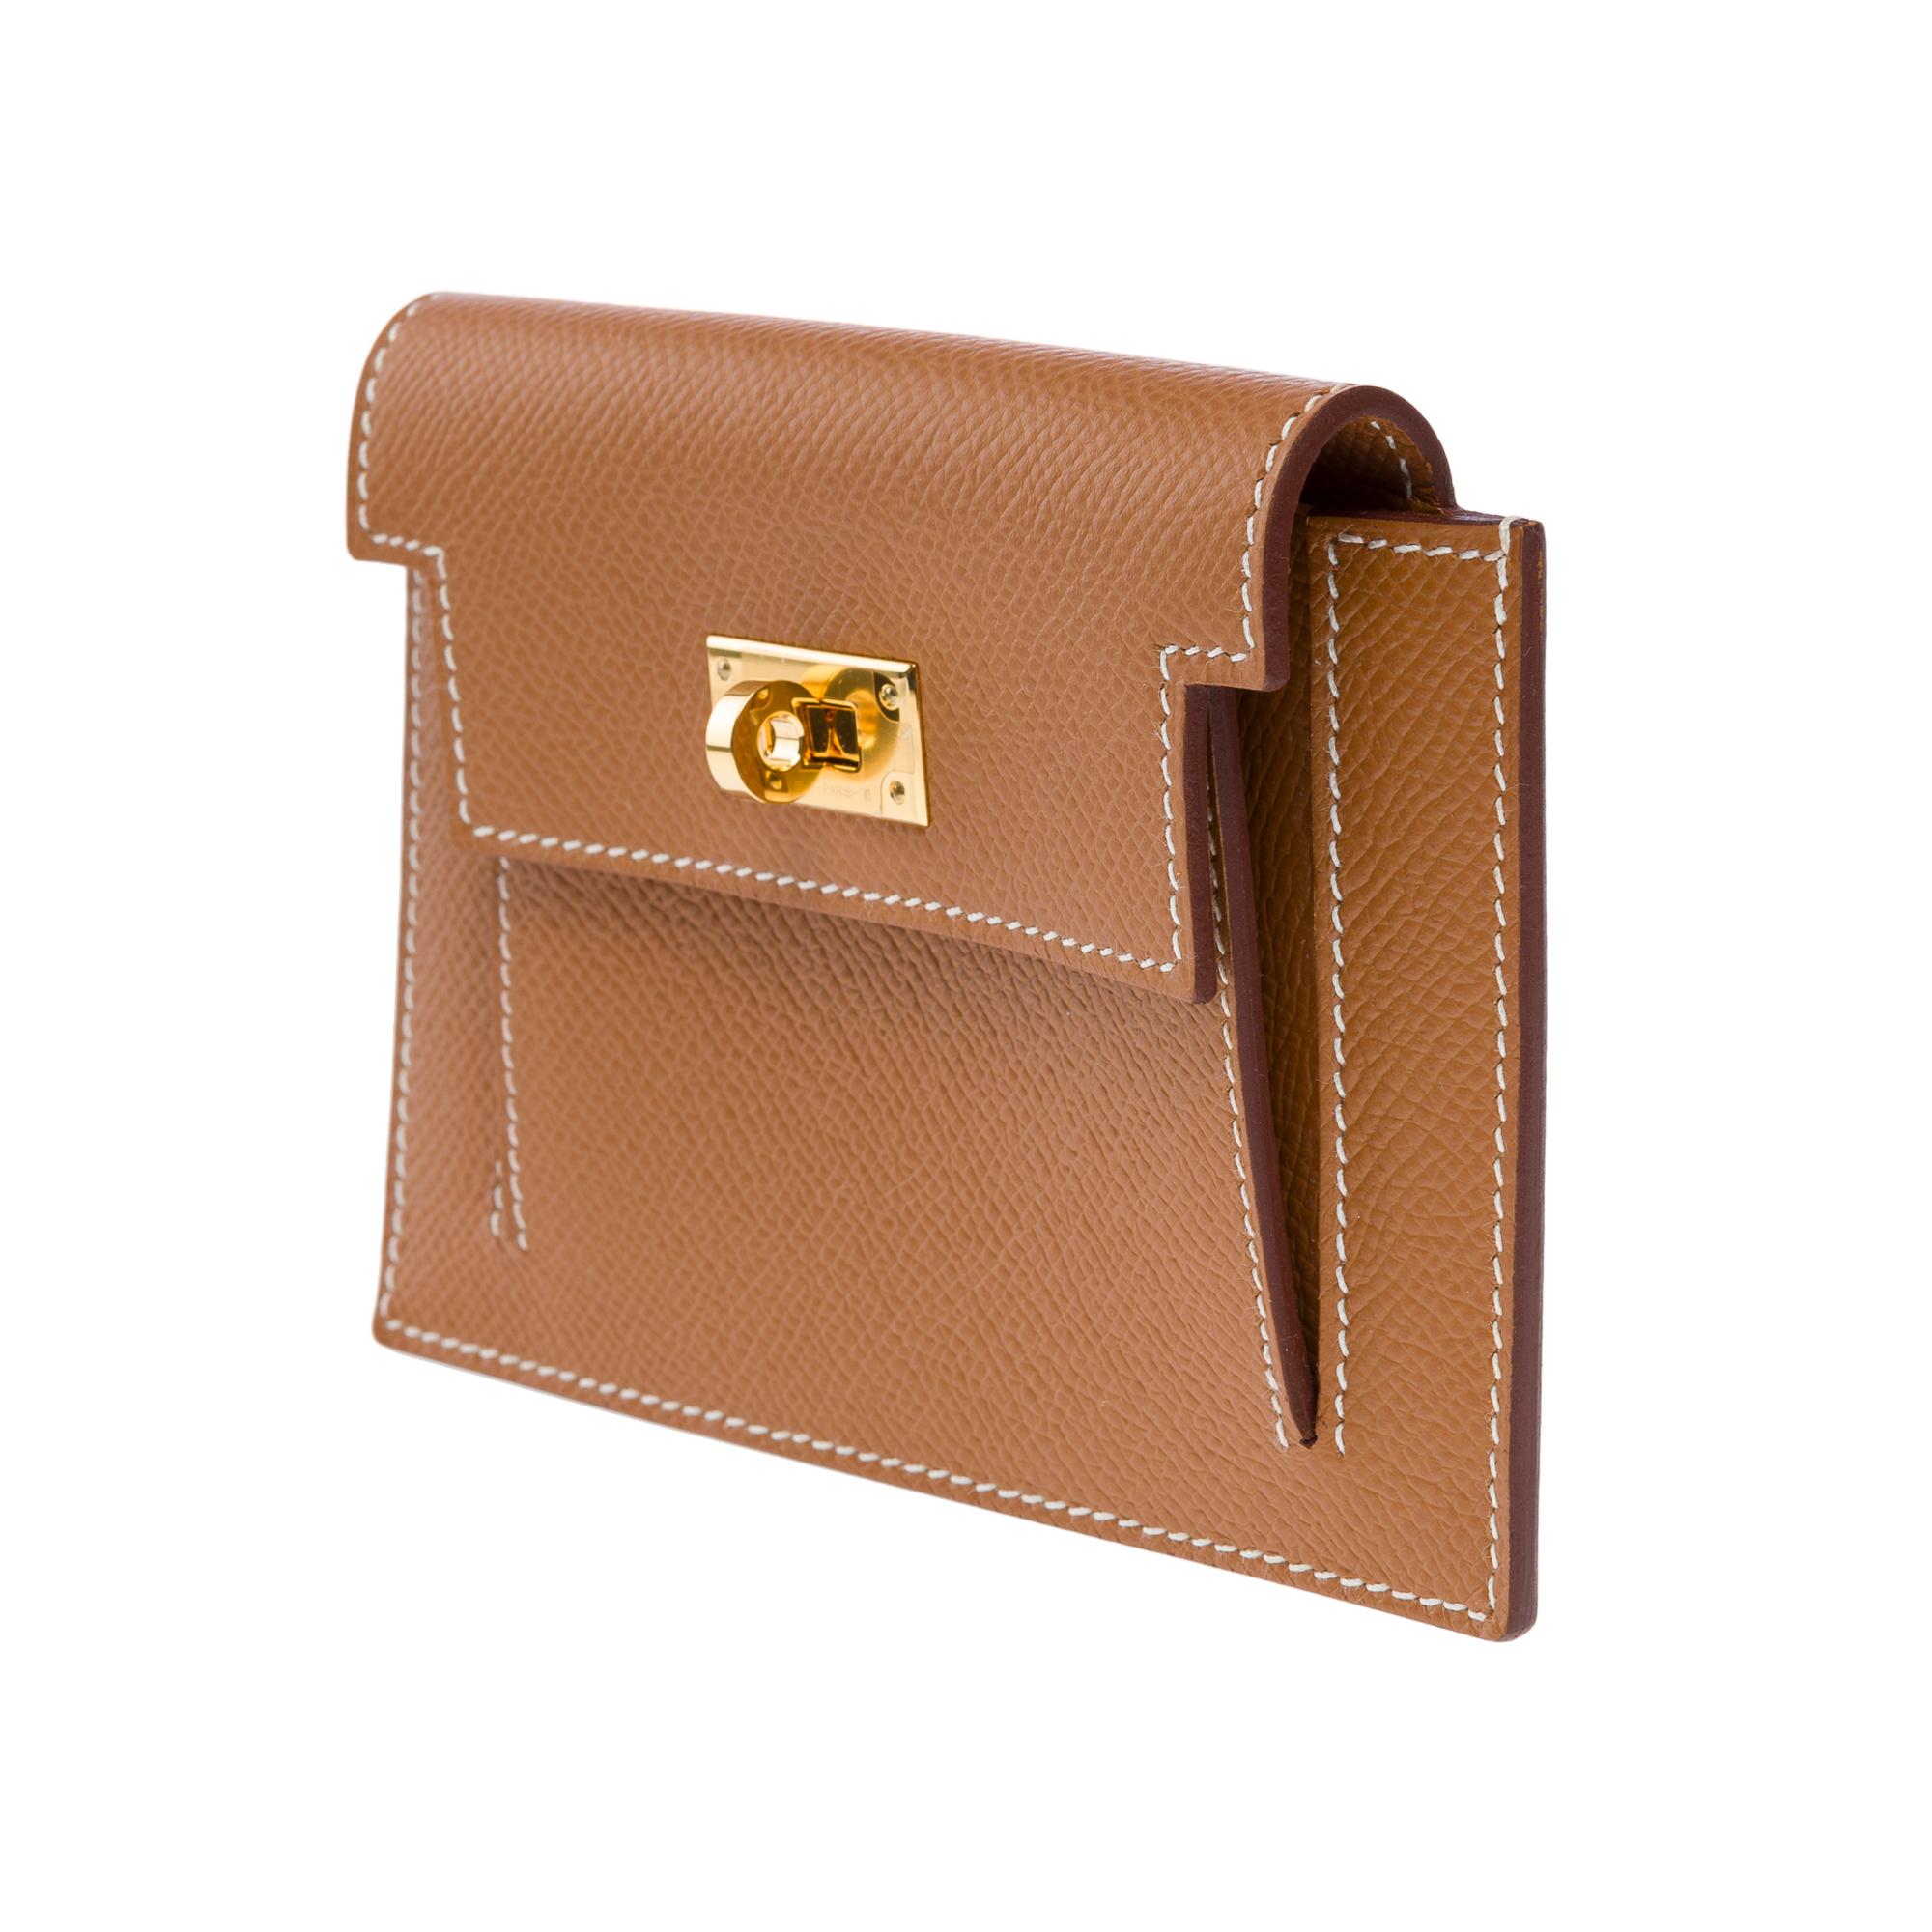 Beautiful New Hermès Kelly Pocket Compact in Gold Epsom calf leather , GHW For Sale 2